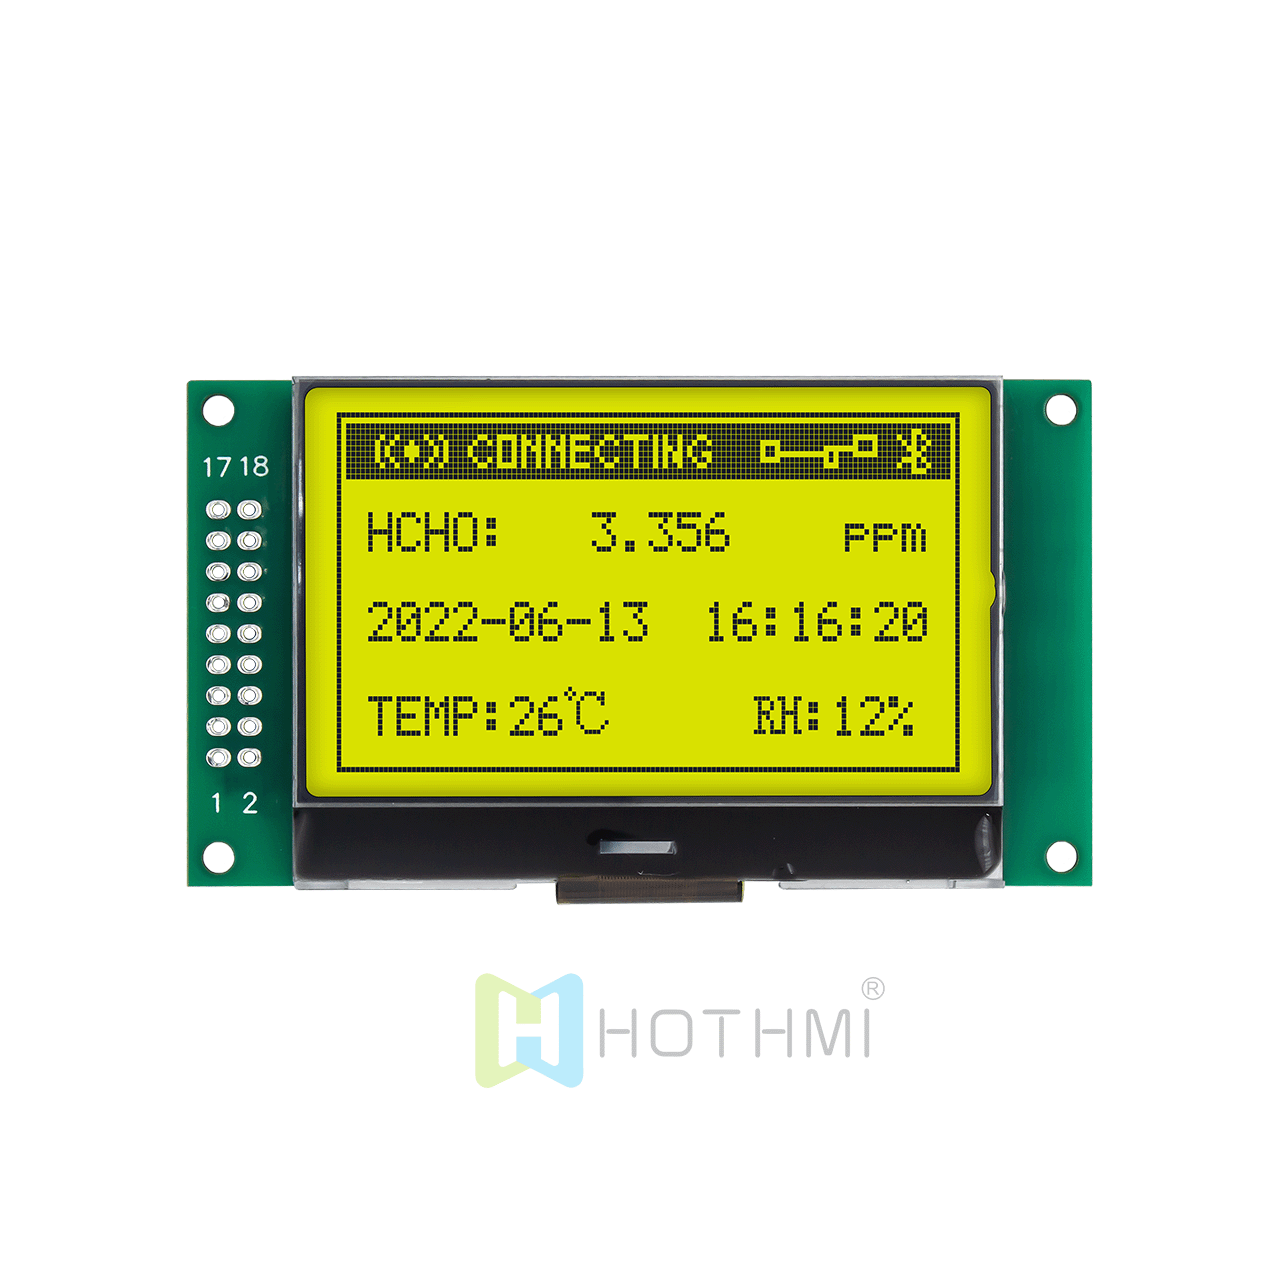 2.4-inch LCD132x64 industrial control graphic LCD screen/LCM13264 graphic dot matrix LCD module/STN positive display yellow-green background